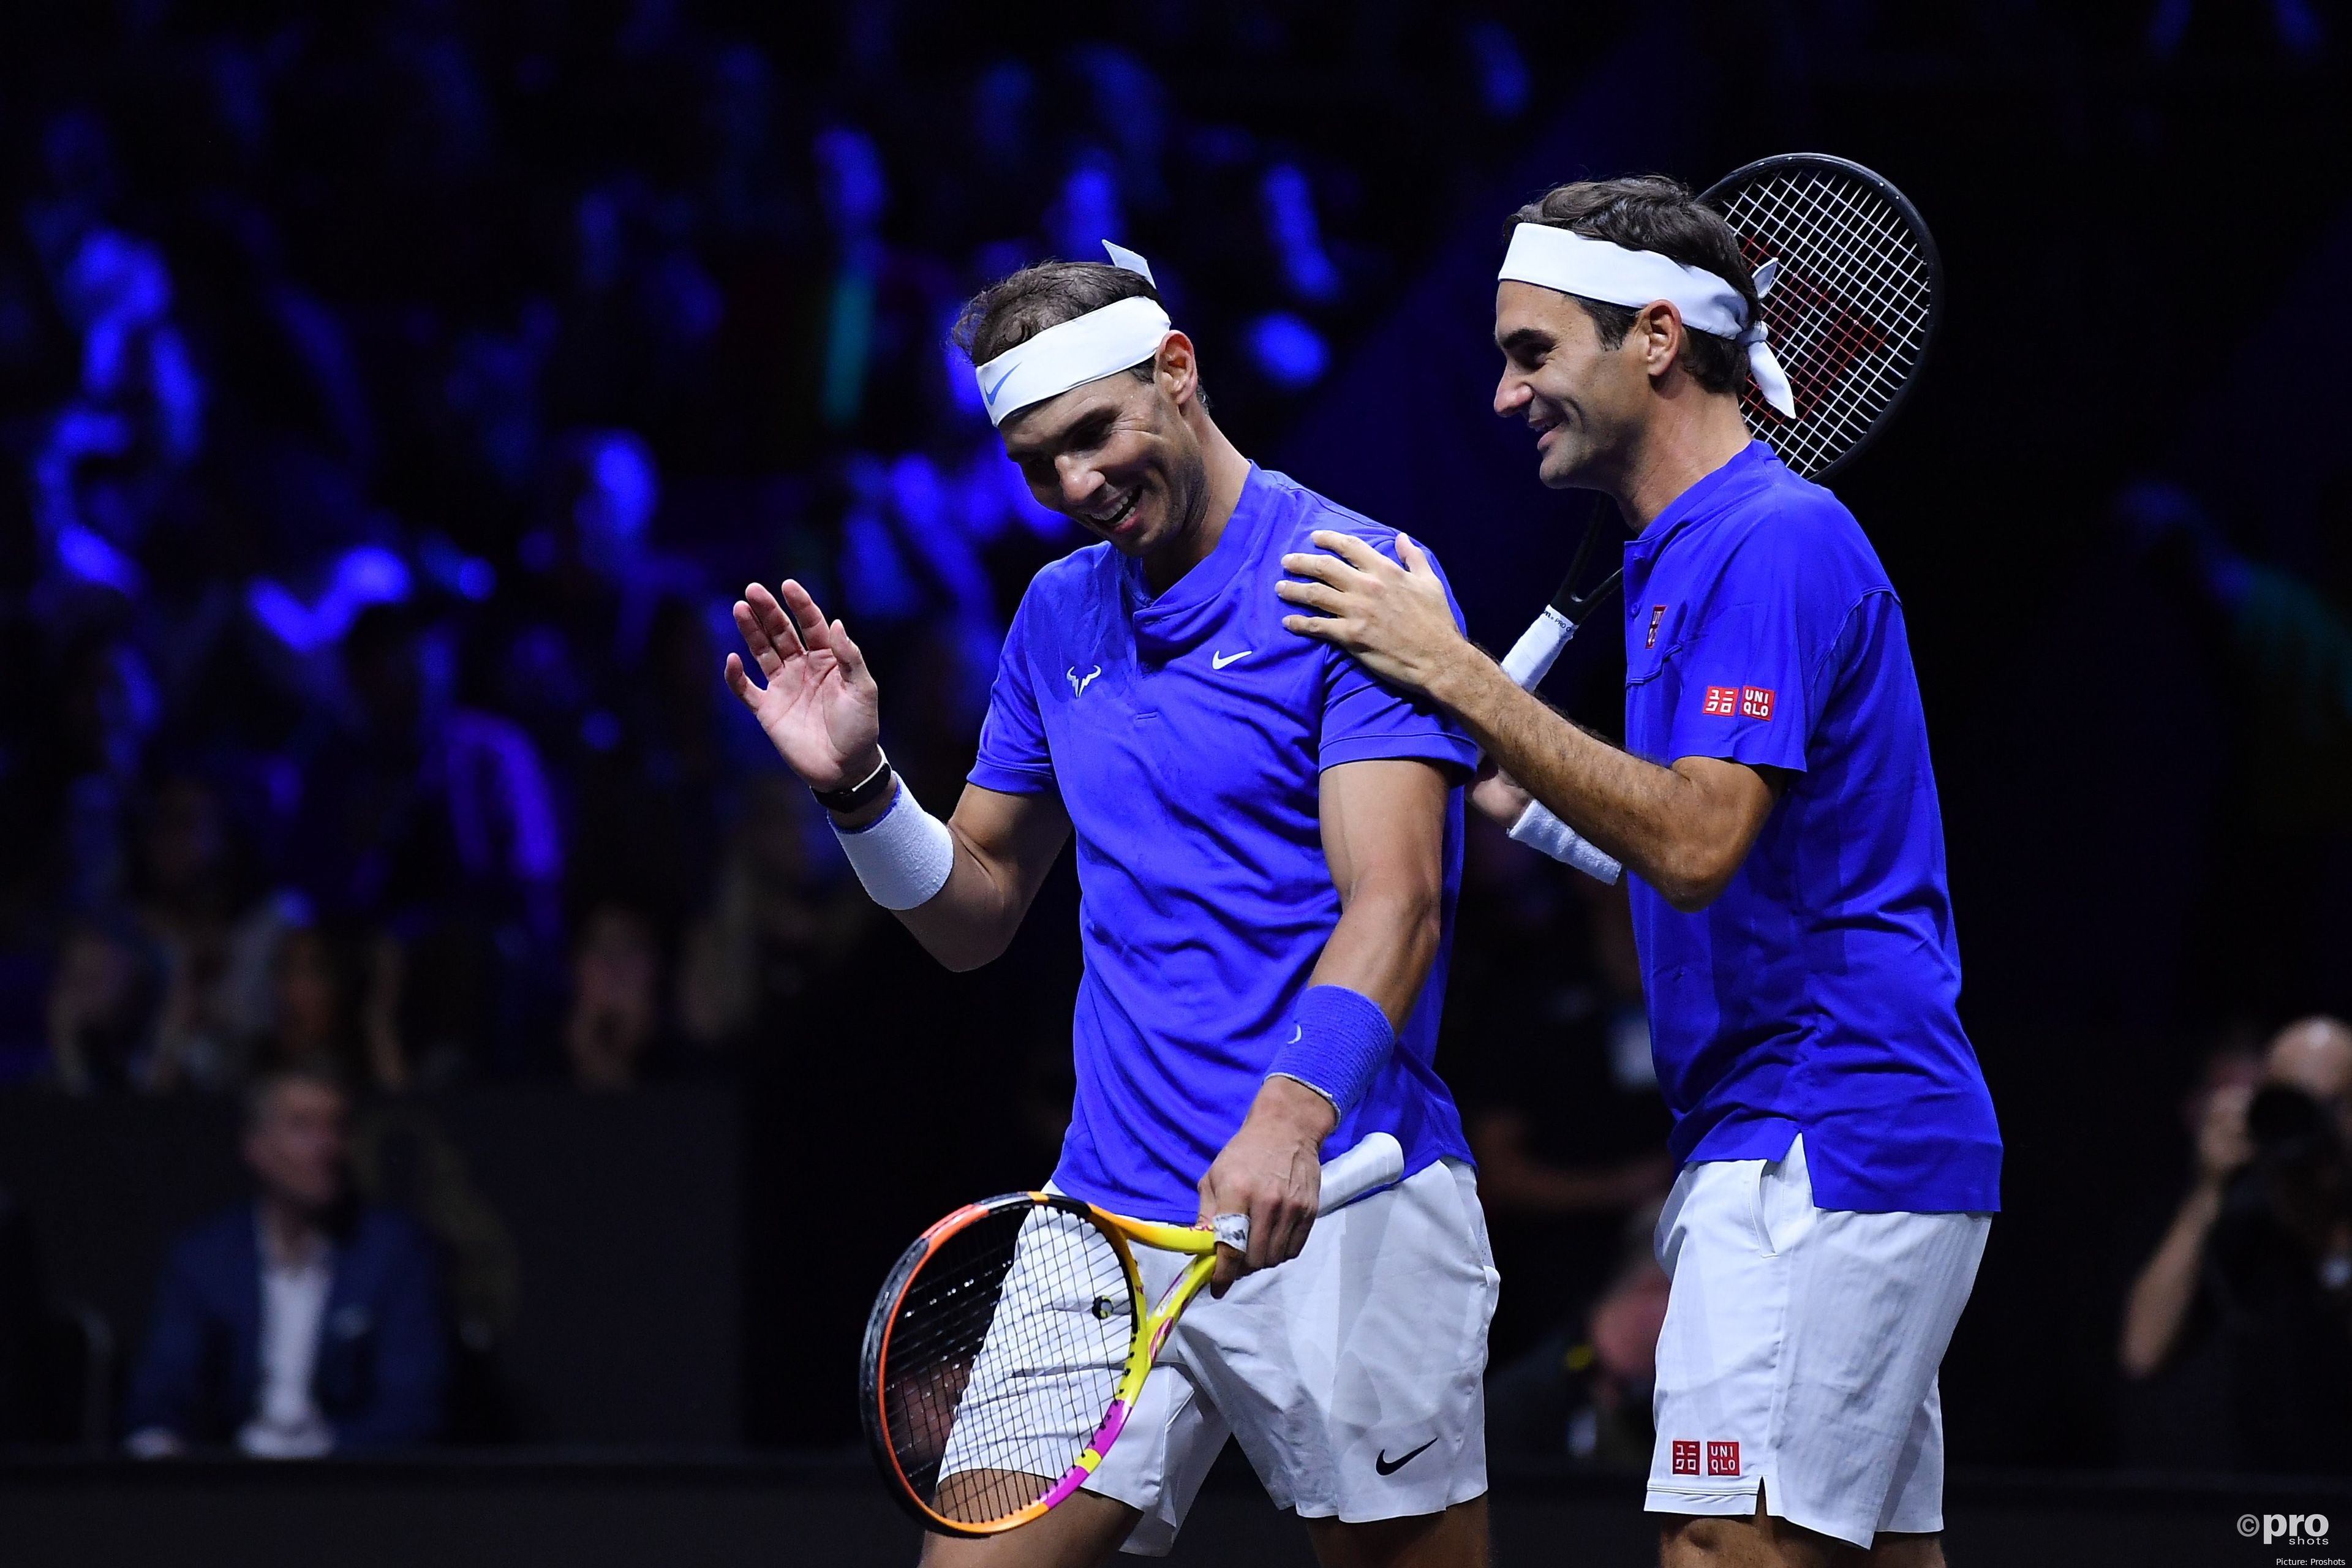 Federer played his last match in a doubles with Rafa Nadal in the 2022 Laver Cup